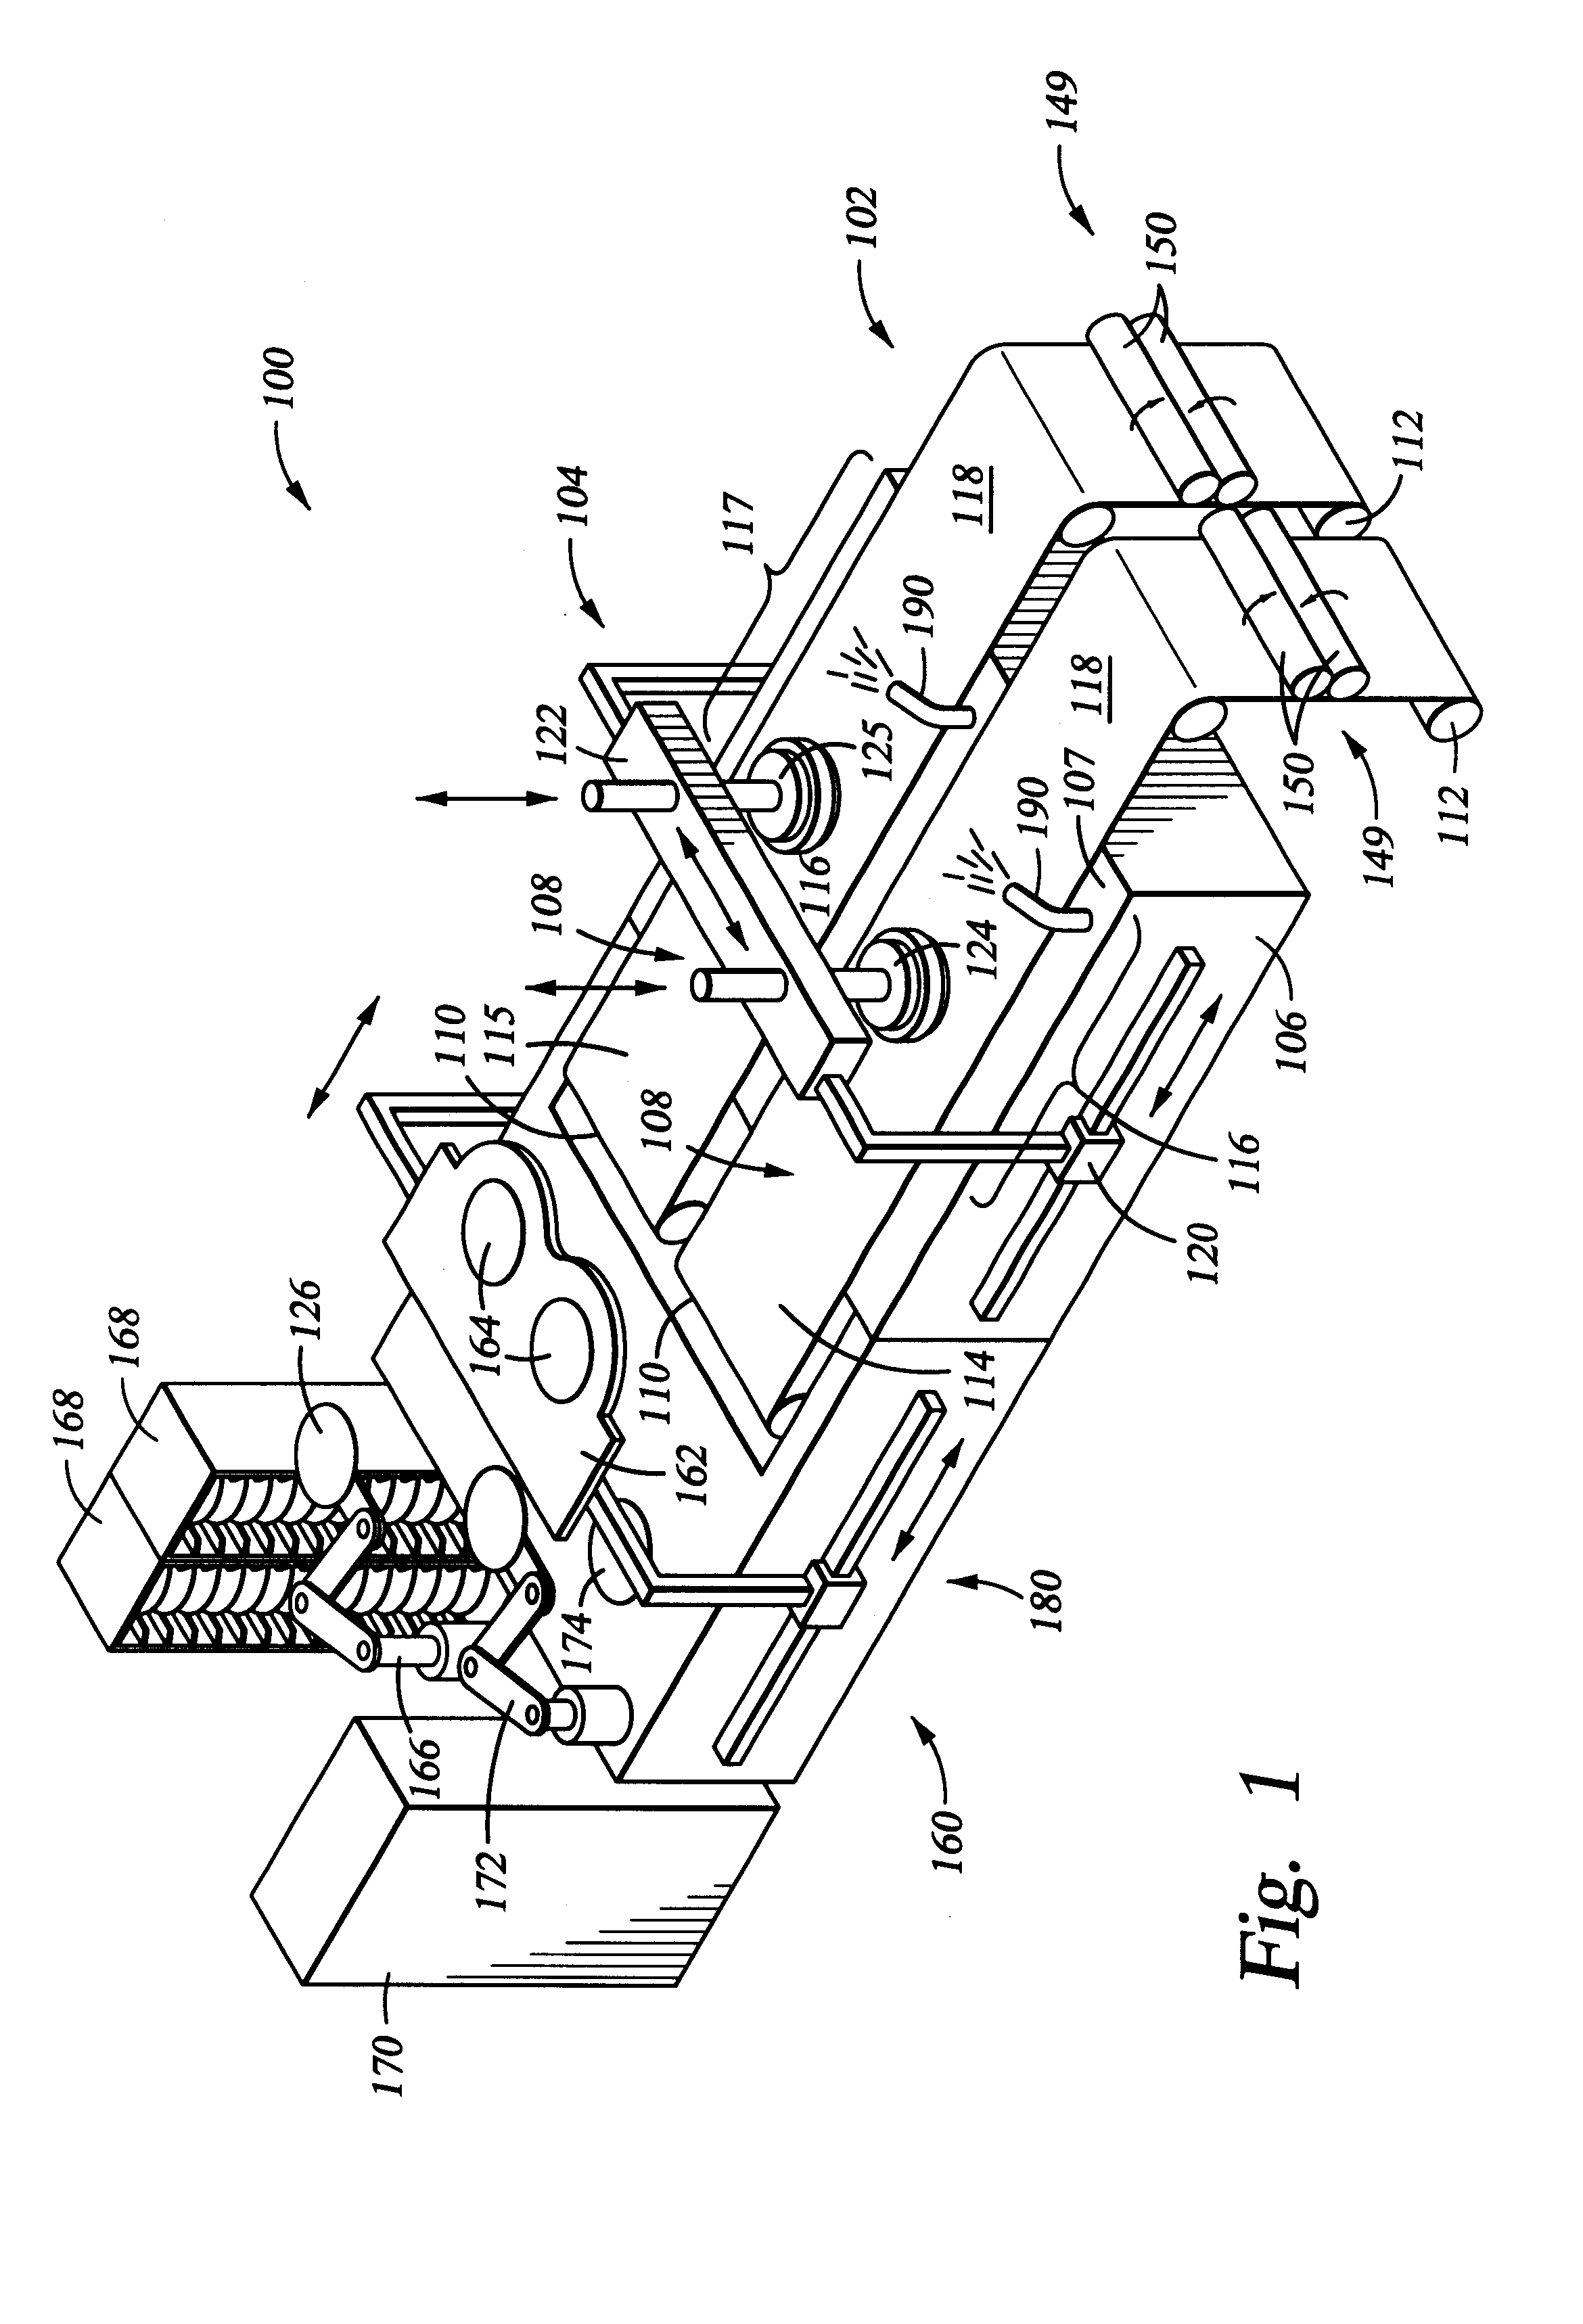 Planarization system with multiple polishing pads